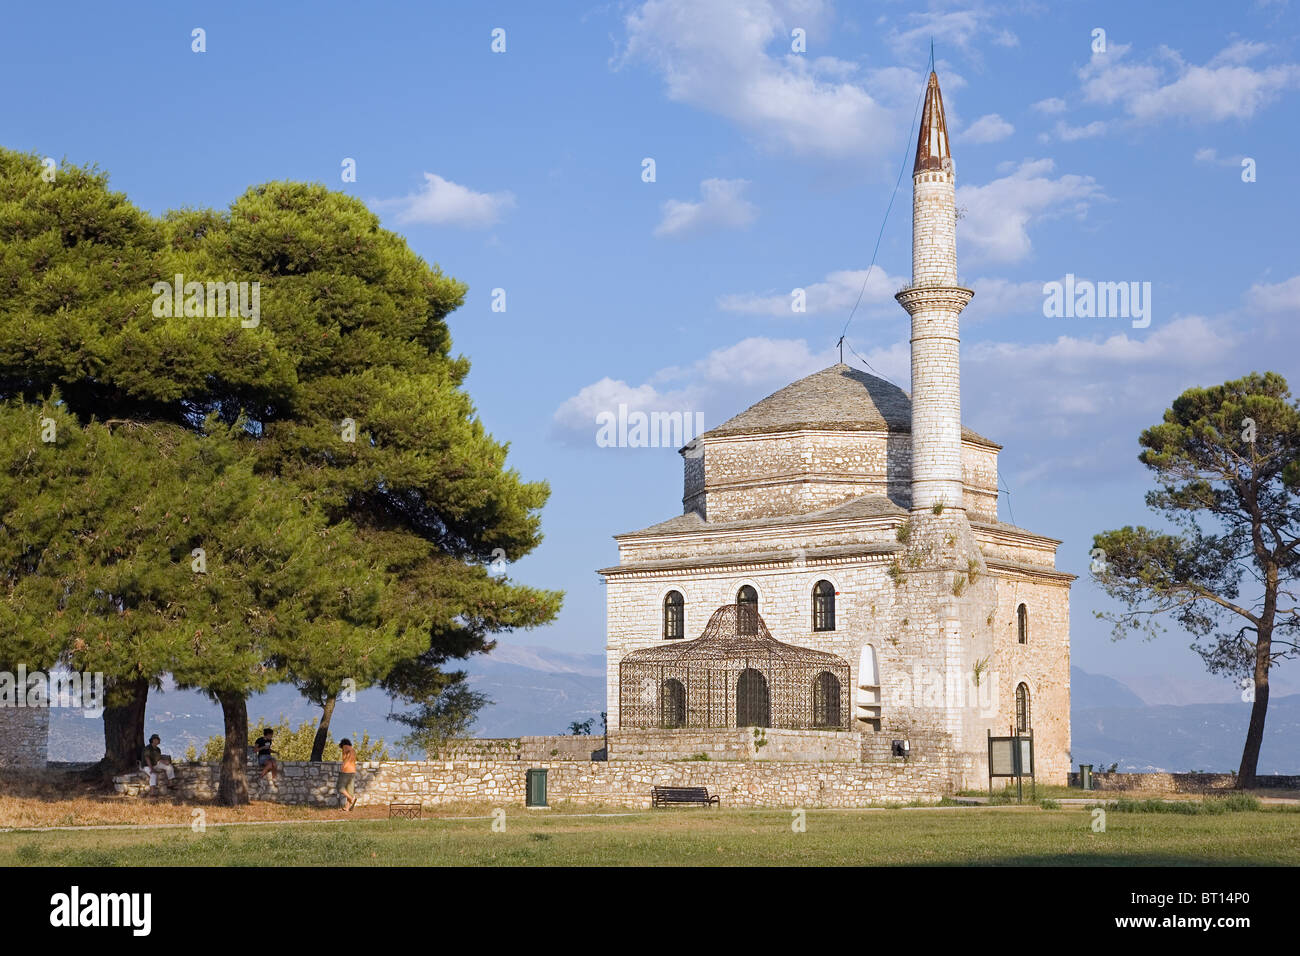 Ioannina, Greece. Fetiye Cami (Victory Mosque) and Tomb of Ali Pasha. It is situated within the Its Kale citadel Stock Photo